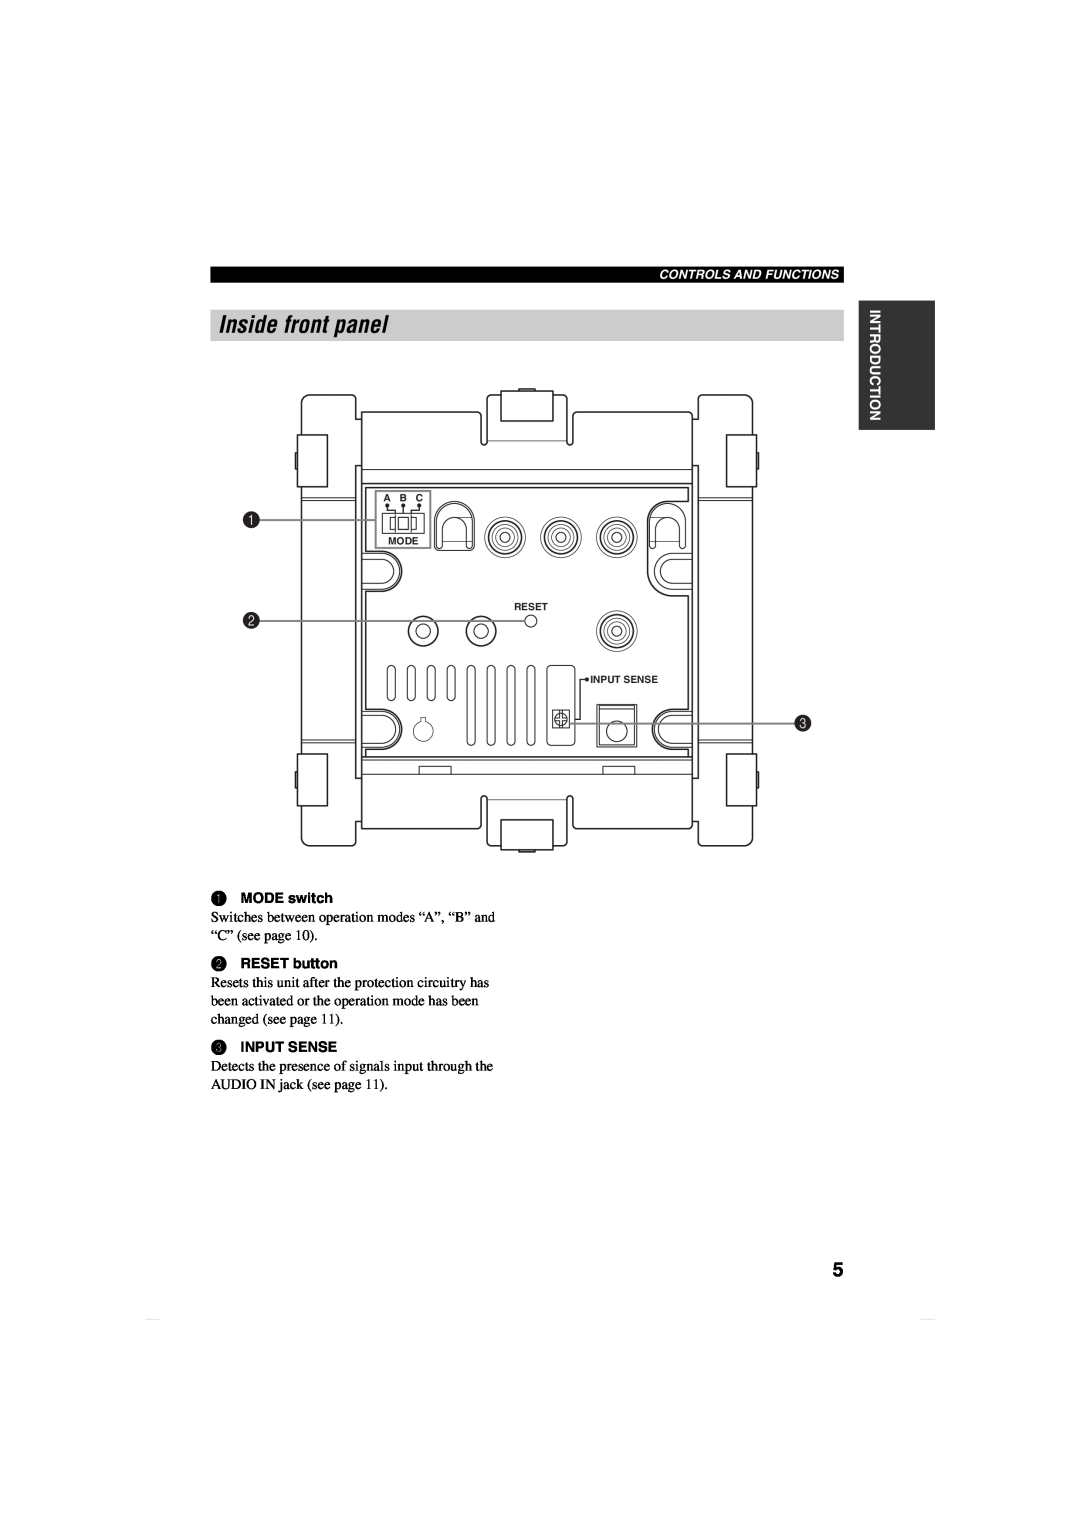 Yamaha MCX-CA15 owner manual Inside front panel, Introduction, Controls And Functions, A B C, Mode Reset, Input Sense 